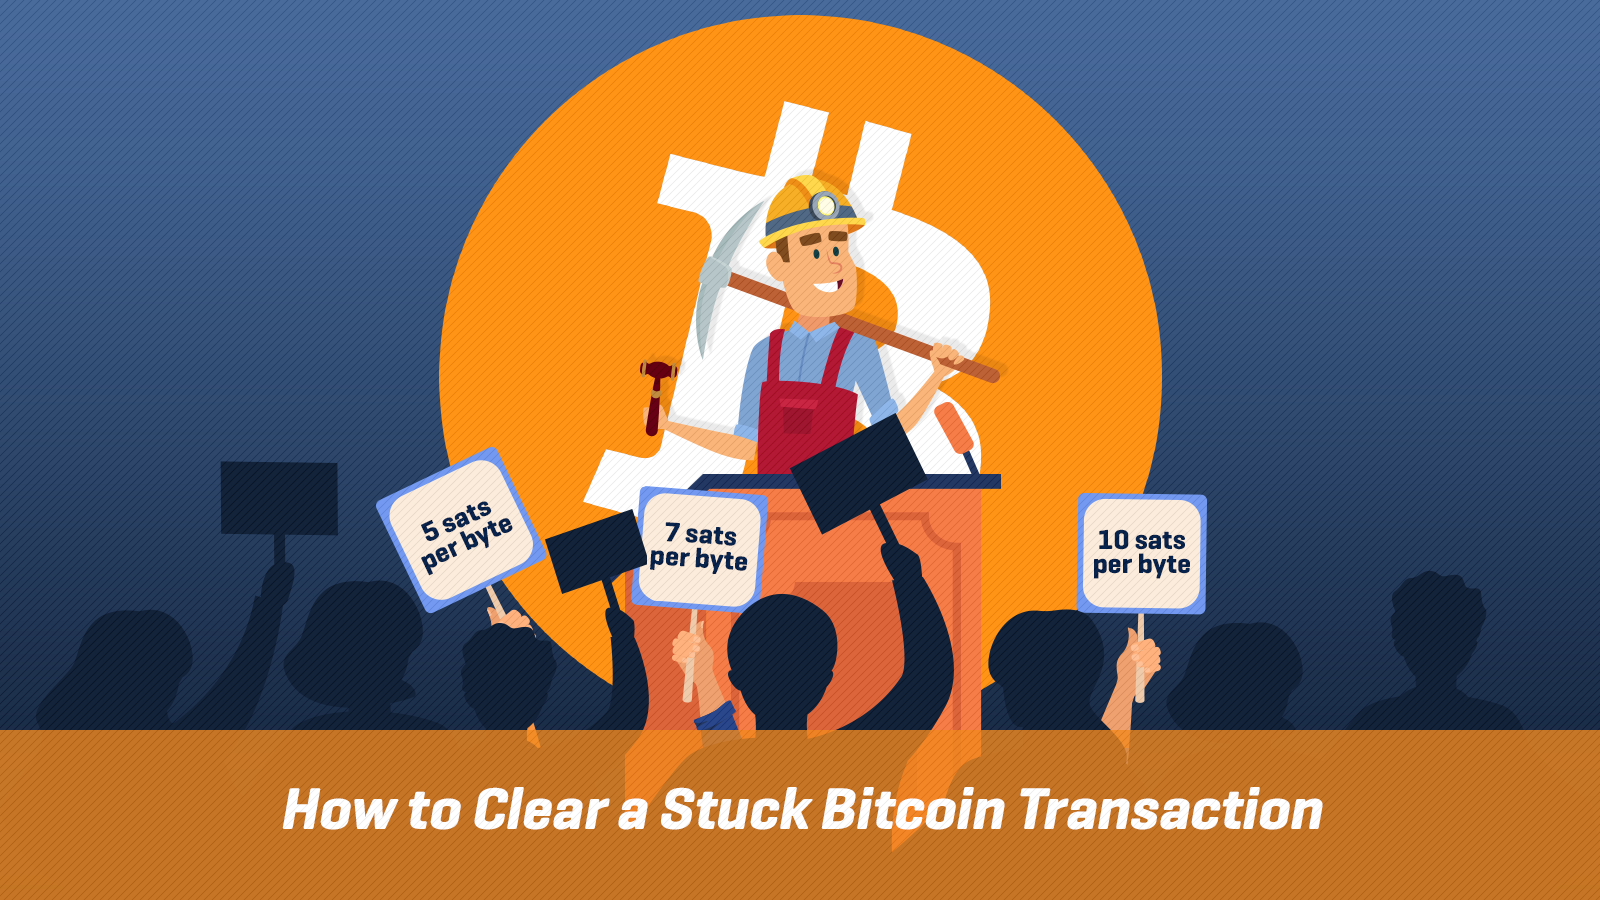 How to Clear a Stuck Bitcoin Transaction